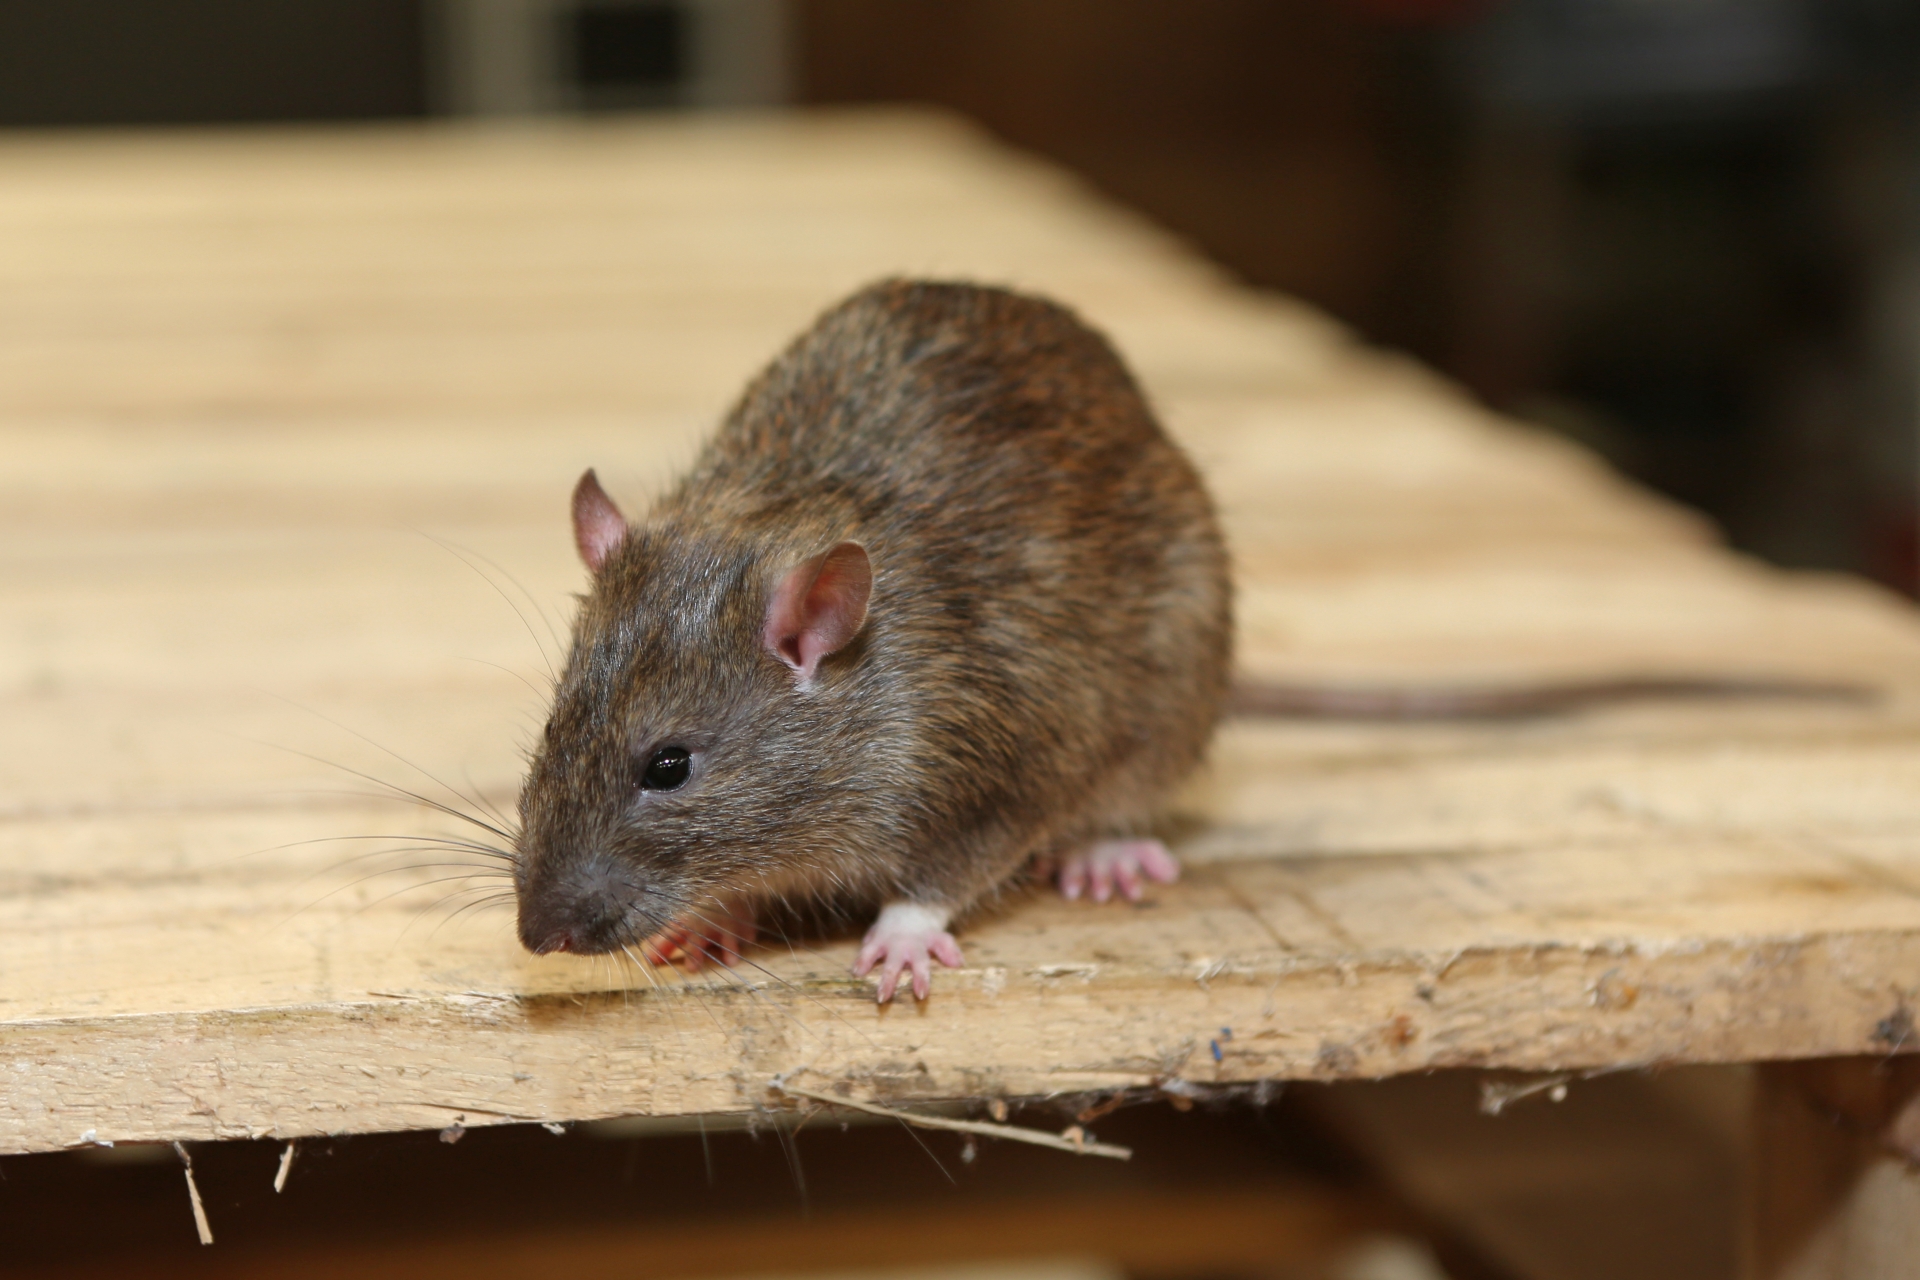 Rat extermination, Pest Control in Camberwell, SE5. Call Now 020 8166 9746